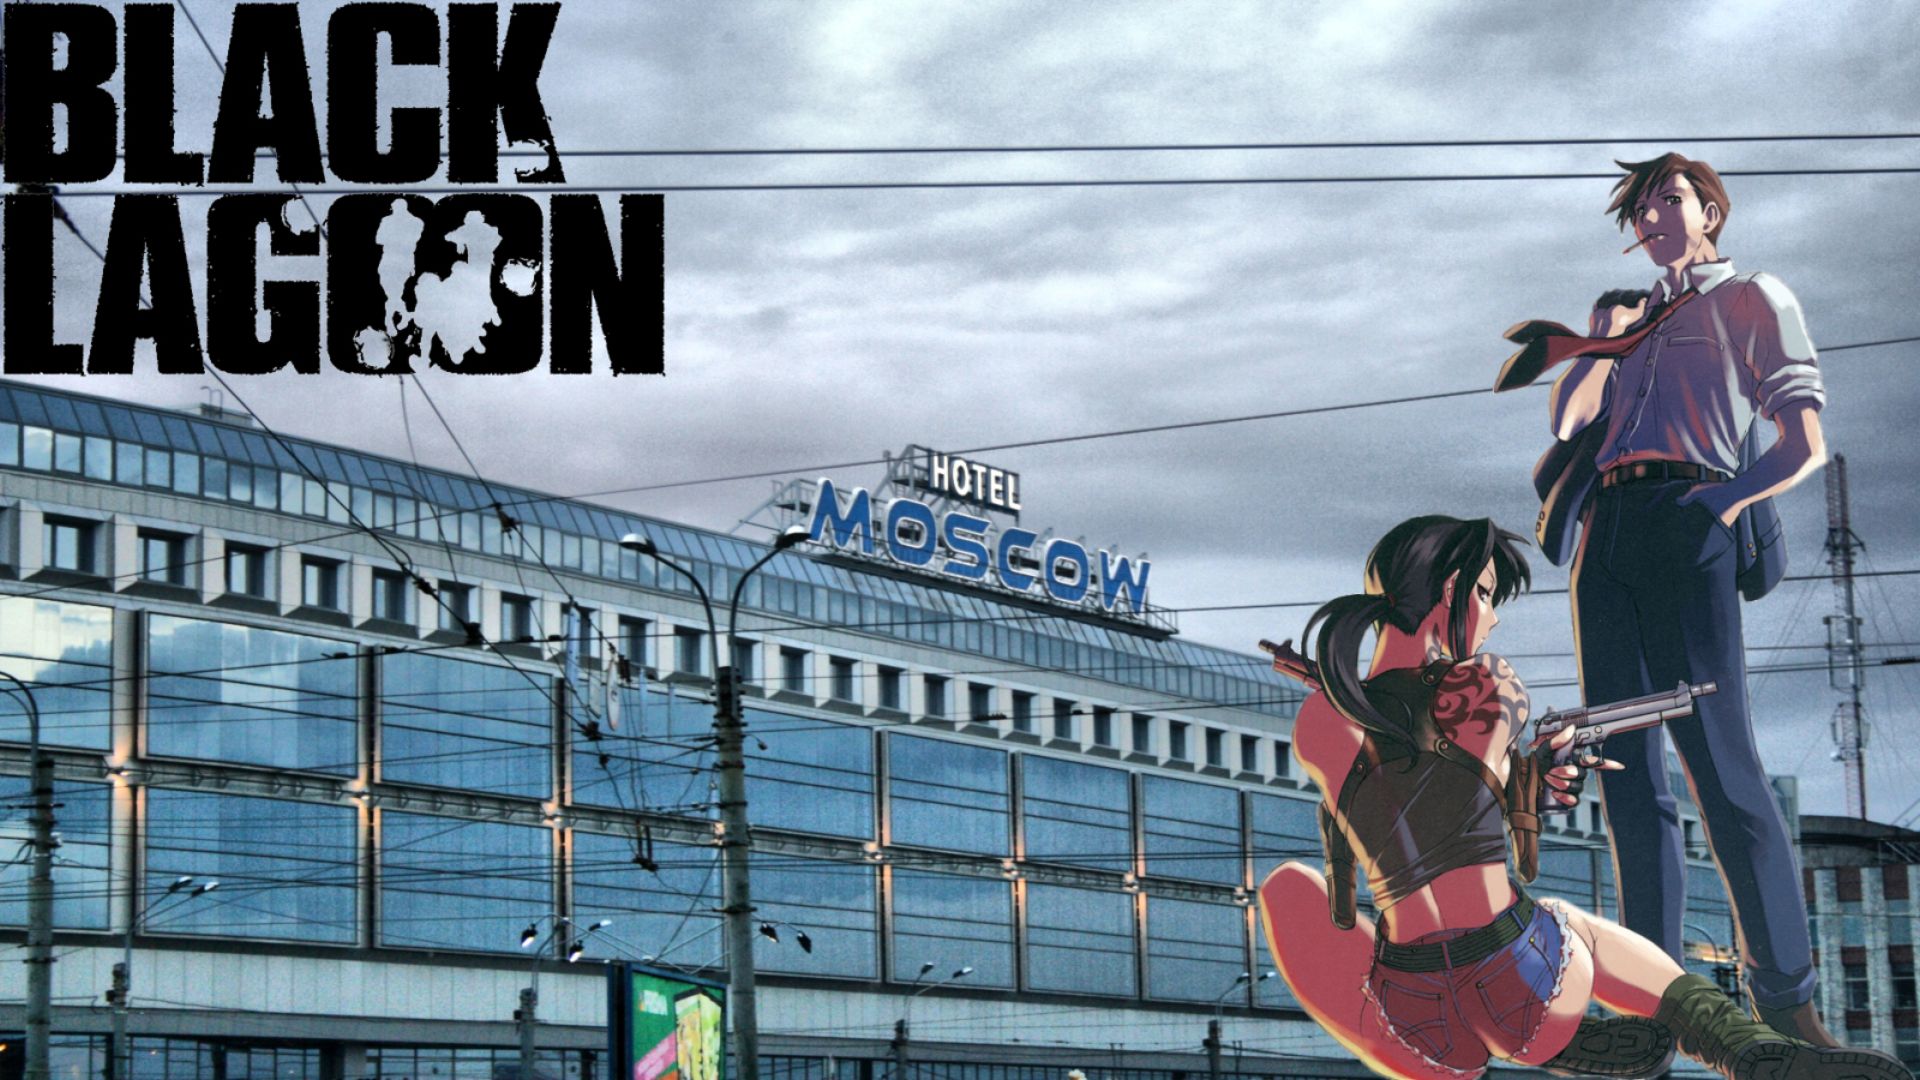 Anime desktop wallpaper featuring characters from the show Black Lagoon